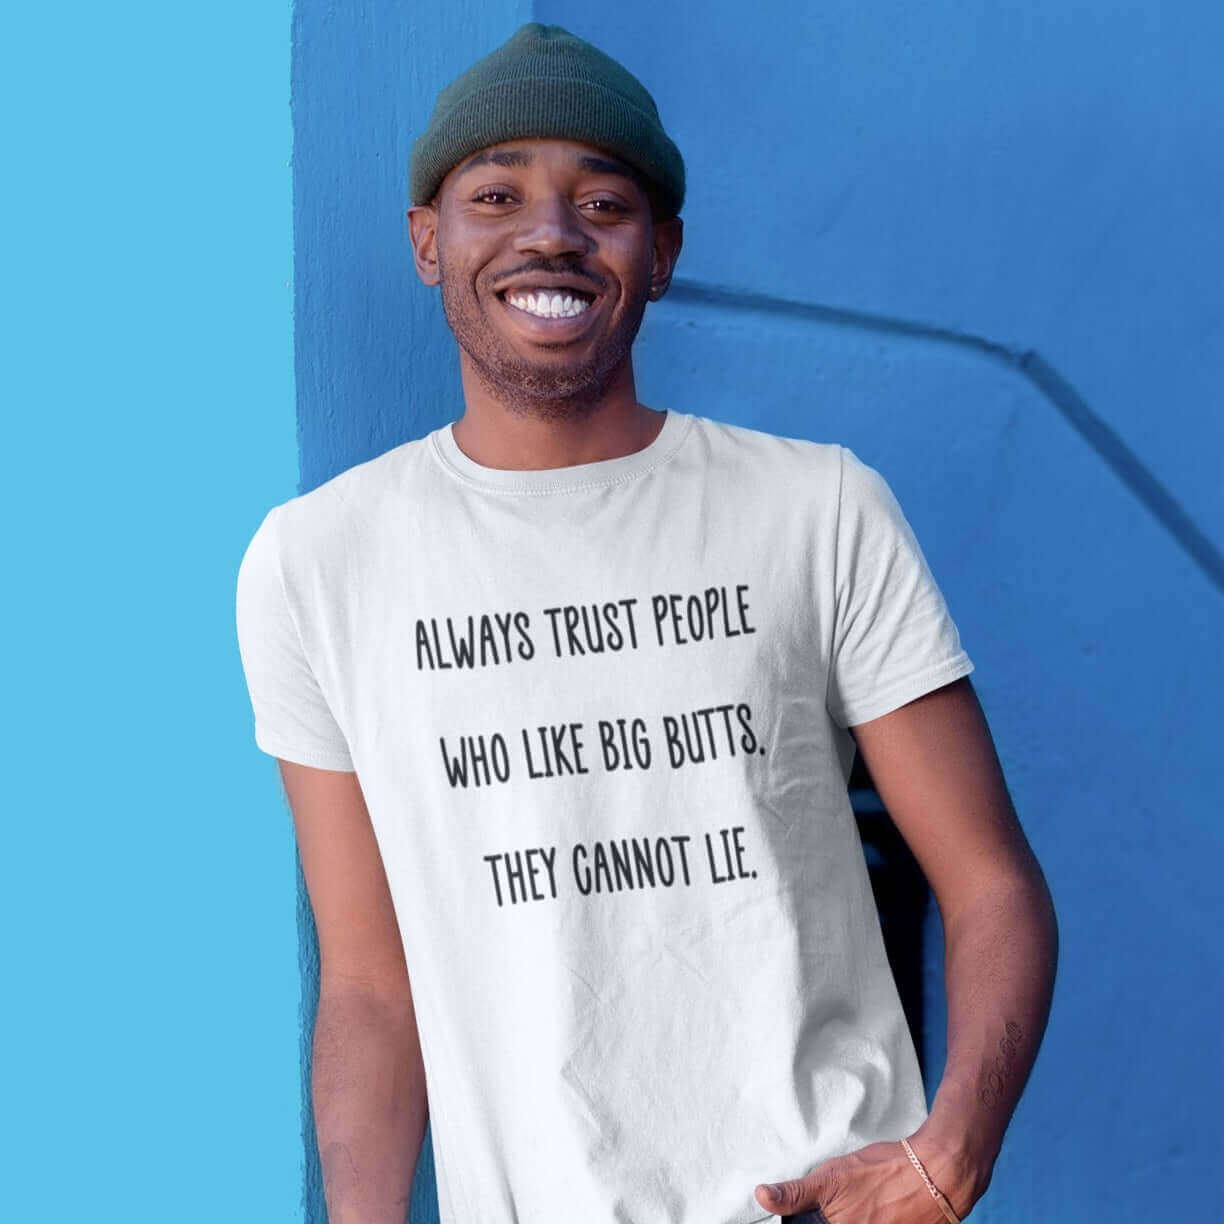 man wearing tshirt that says always trust people who like big butts, they can not lie